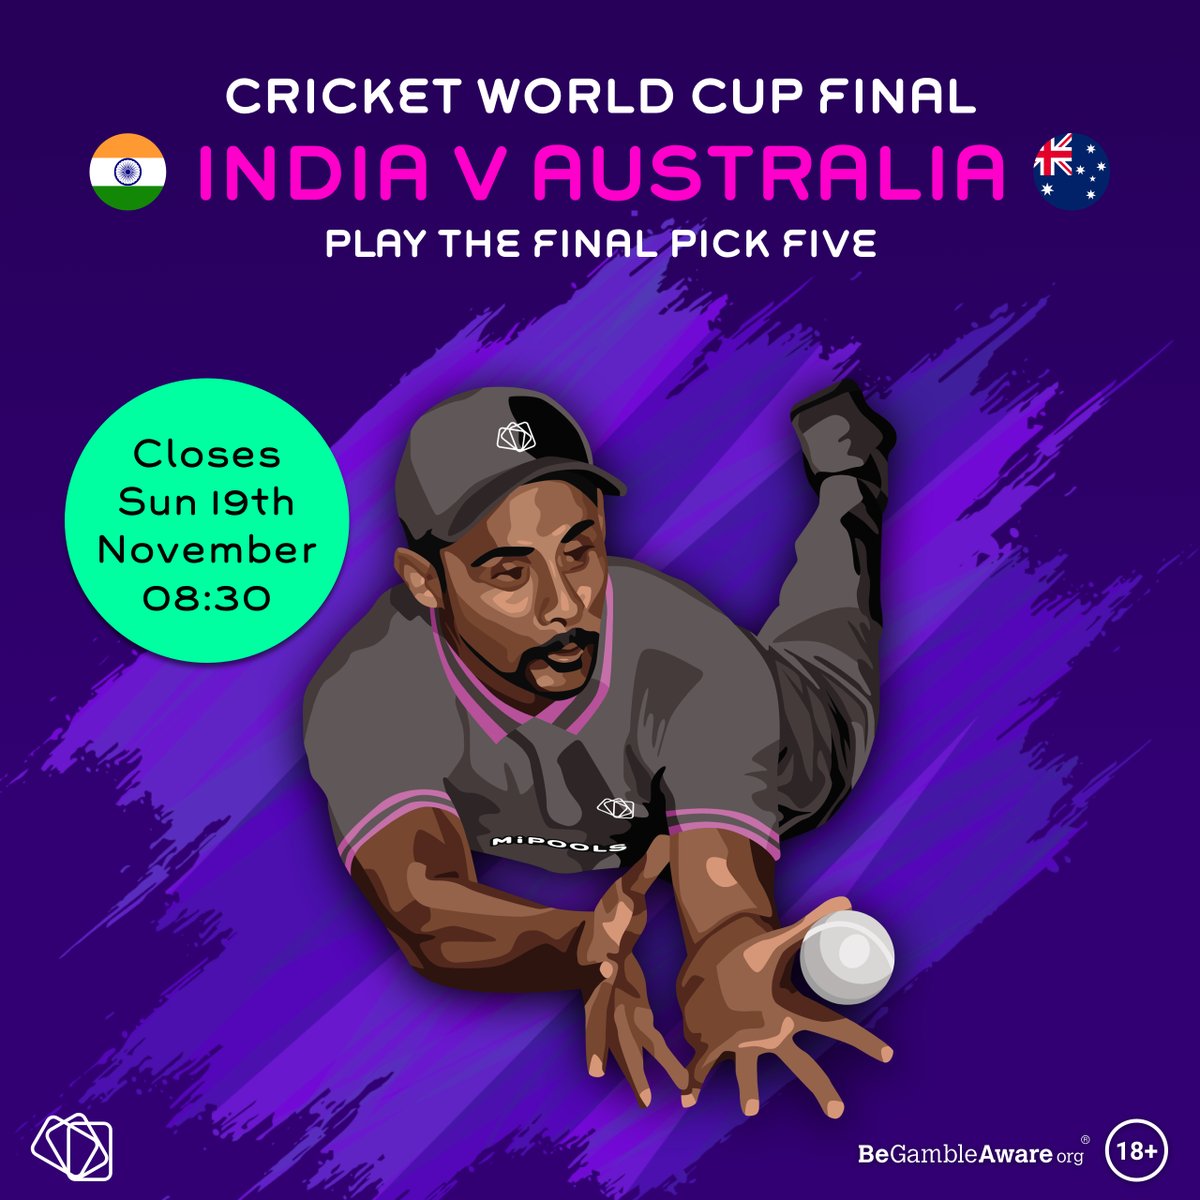 What a final we have in store! 🇮🇳🆚🇦🇺

It's your last chance to play #CWC23 Pick Five. We have multi entry stakes available with cash prizes to be won!🏆

Invite your friends to join with you. Must be 18+. Play now at MiPools.com

#ItPaysToPlay